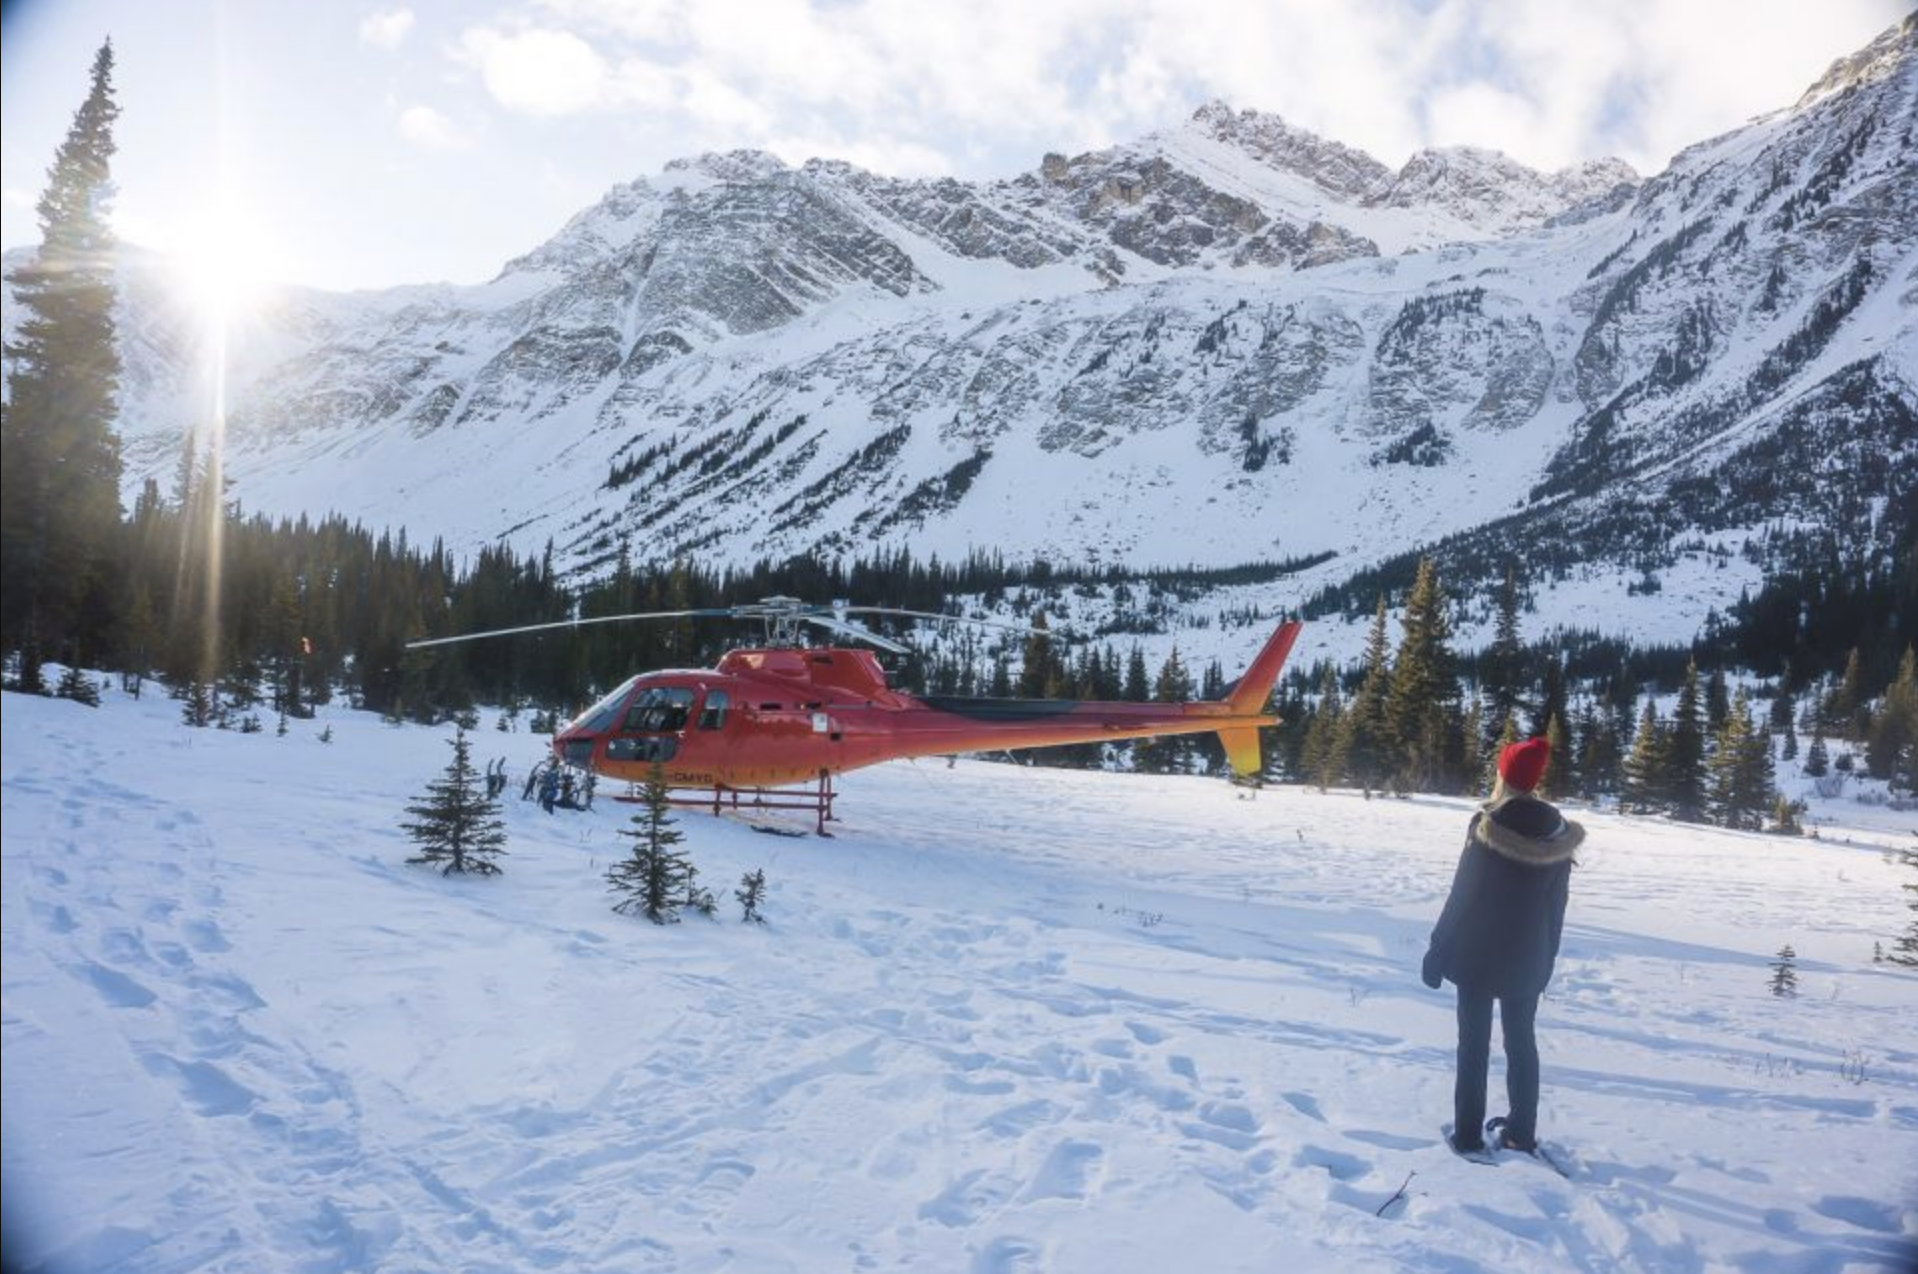 7. Canadian Rockies Abraham Lake Ice Bubbles Helicopter Tour